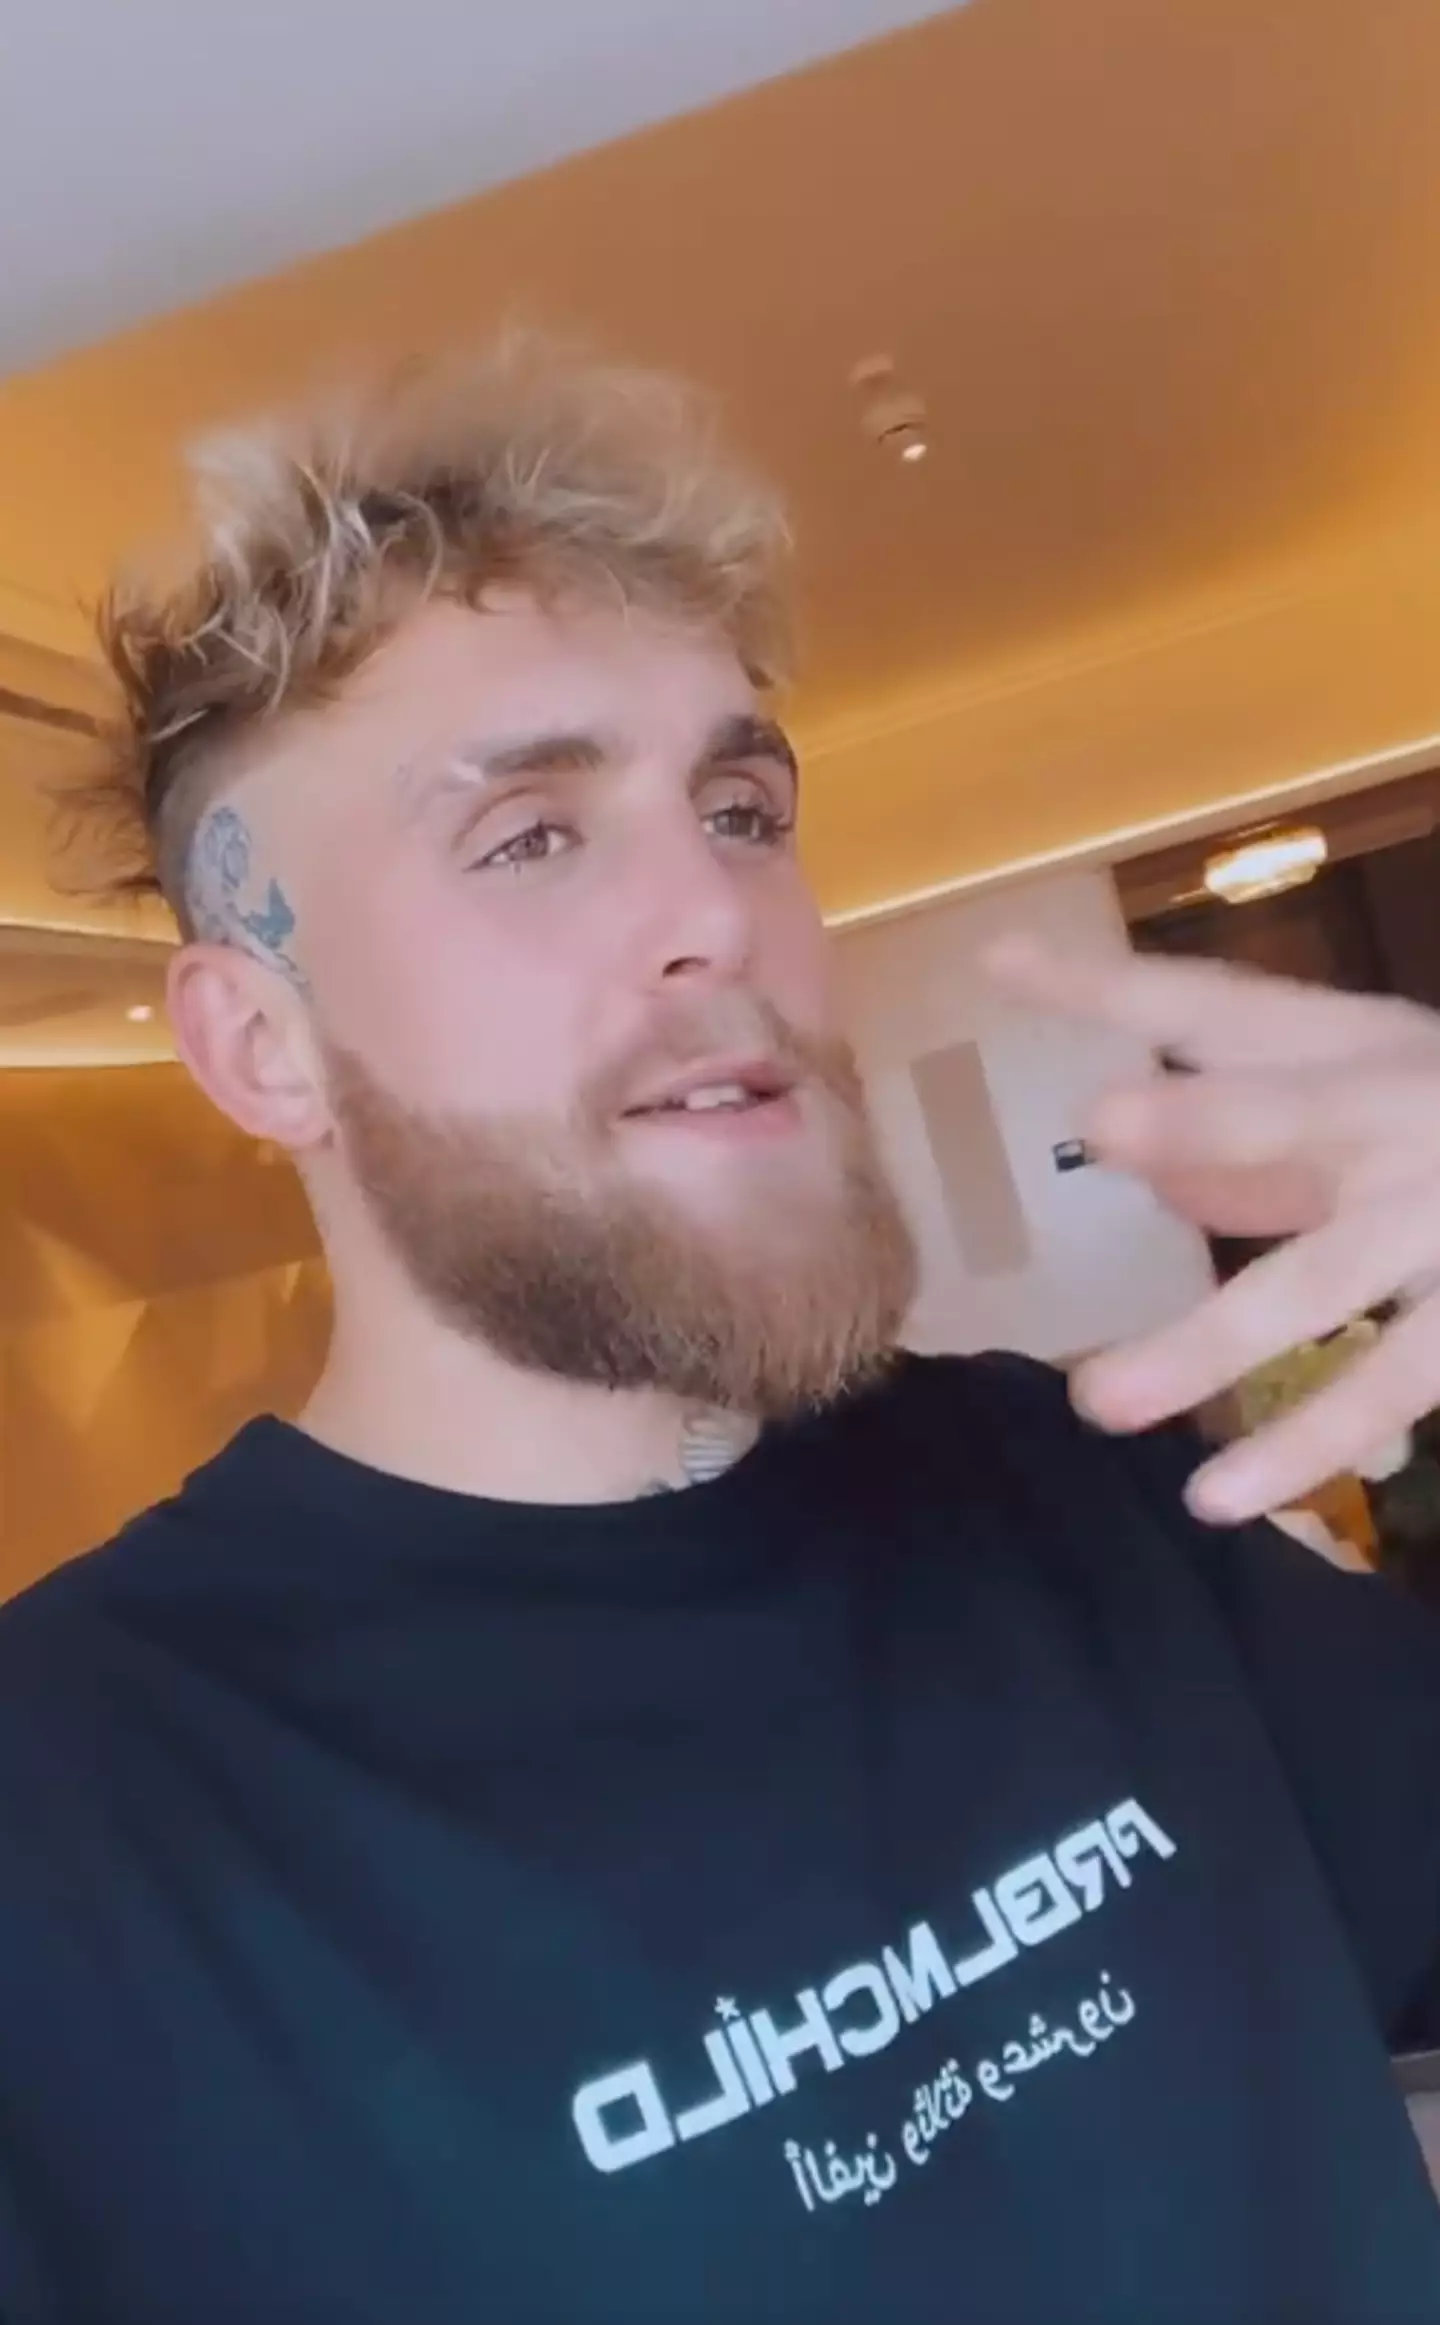 Jake Paul called out Tommy Fury for not signing the contract for their bet.